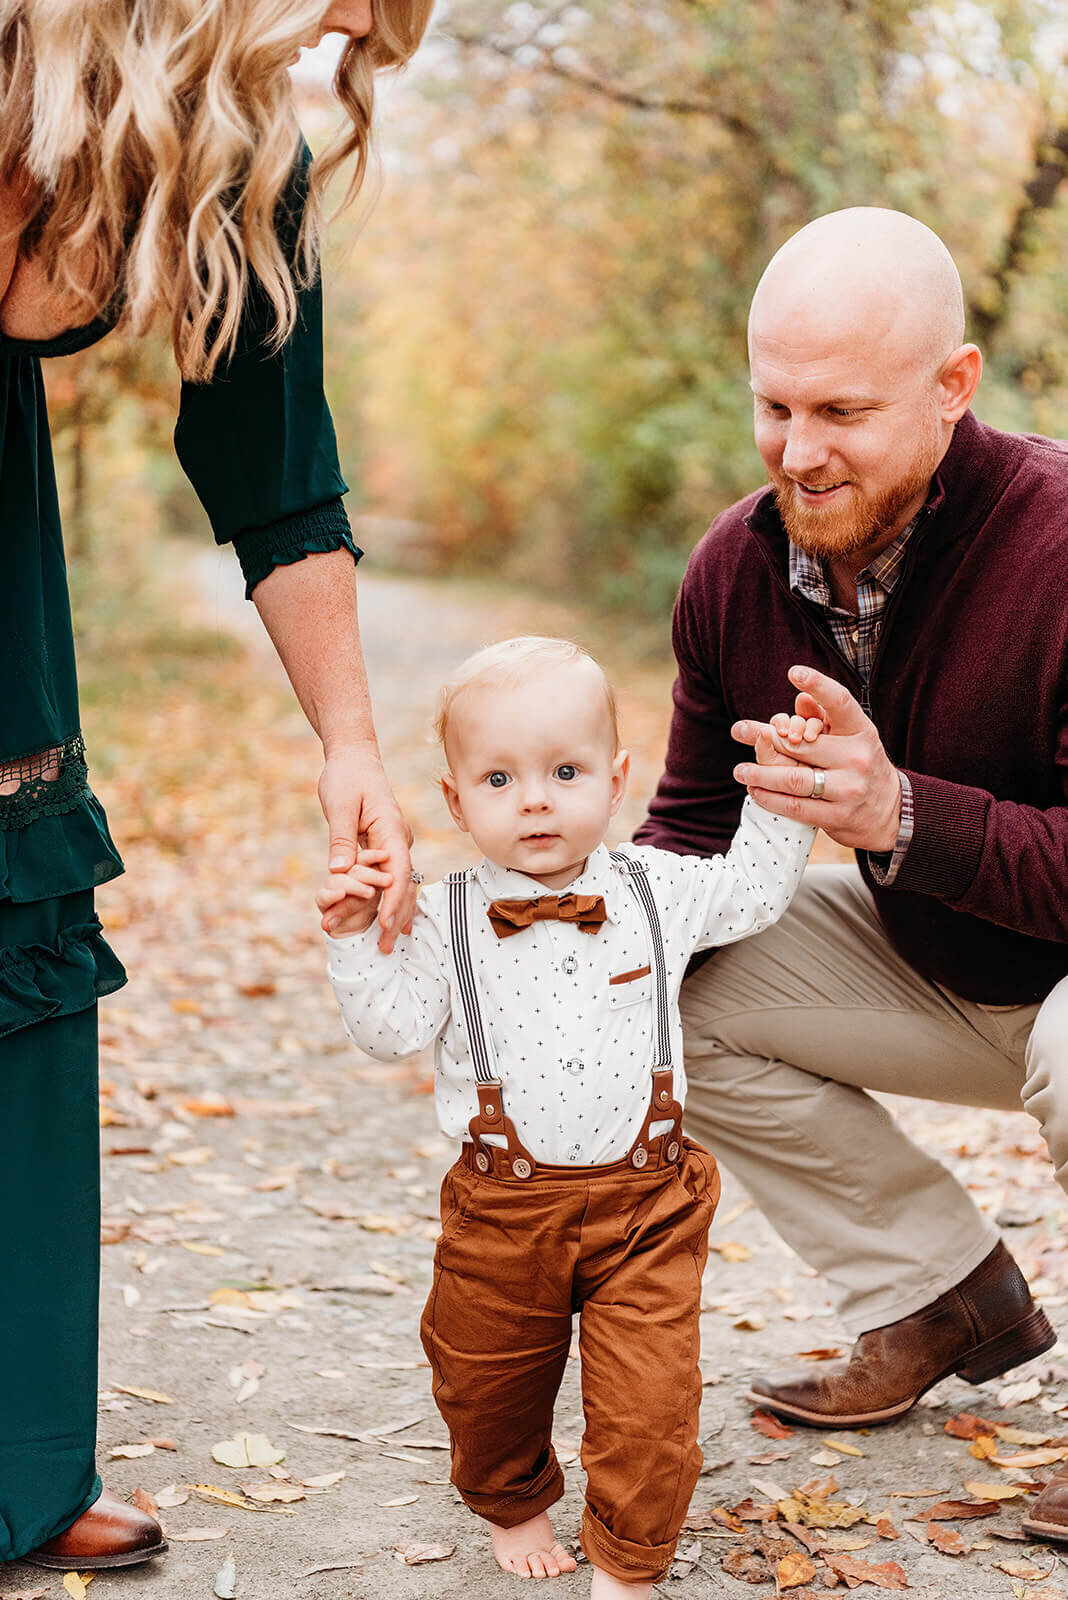 one year old boy walking barefoot wearing rust colored pants, suspenders, and a bowtie on his button down shirt.  He is being supported by holding one hand of each of his parents on each side.